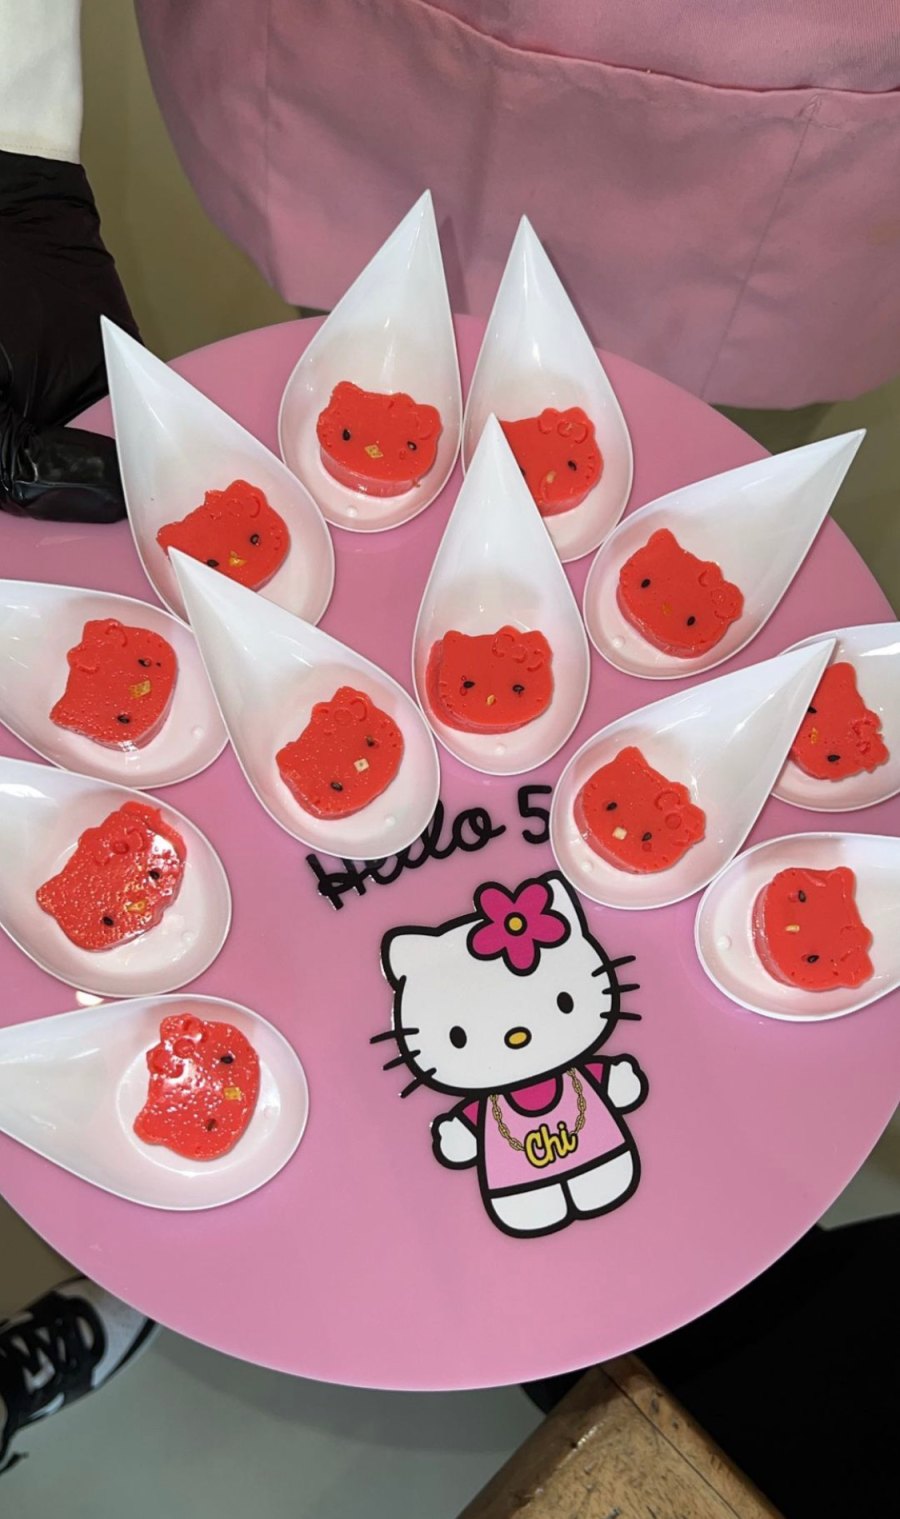 Chicago West's Hello Kitty Party